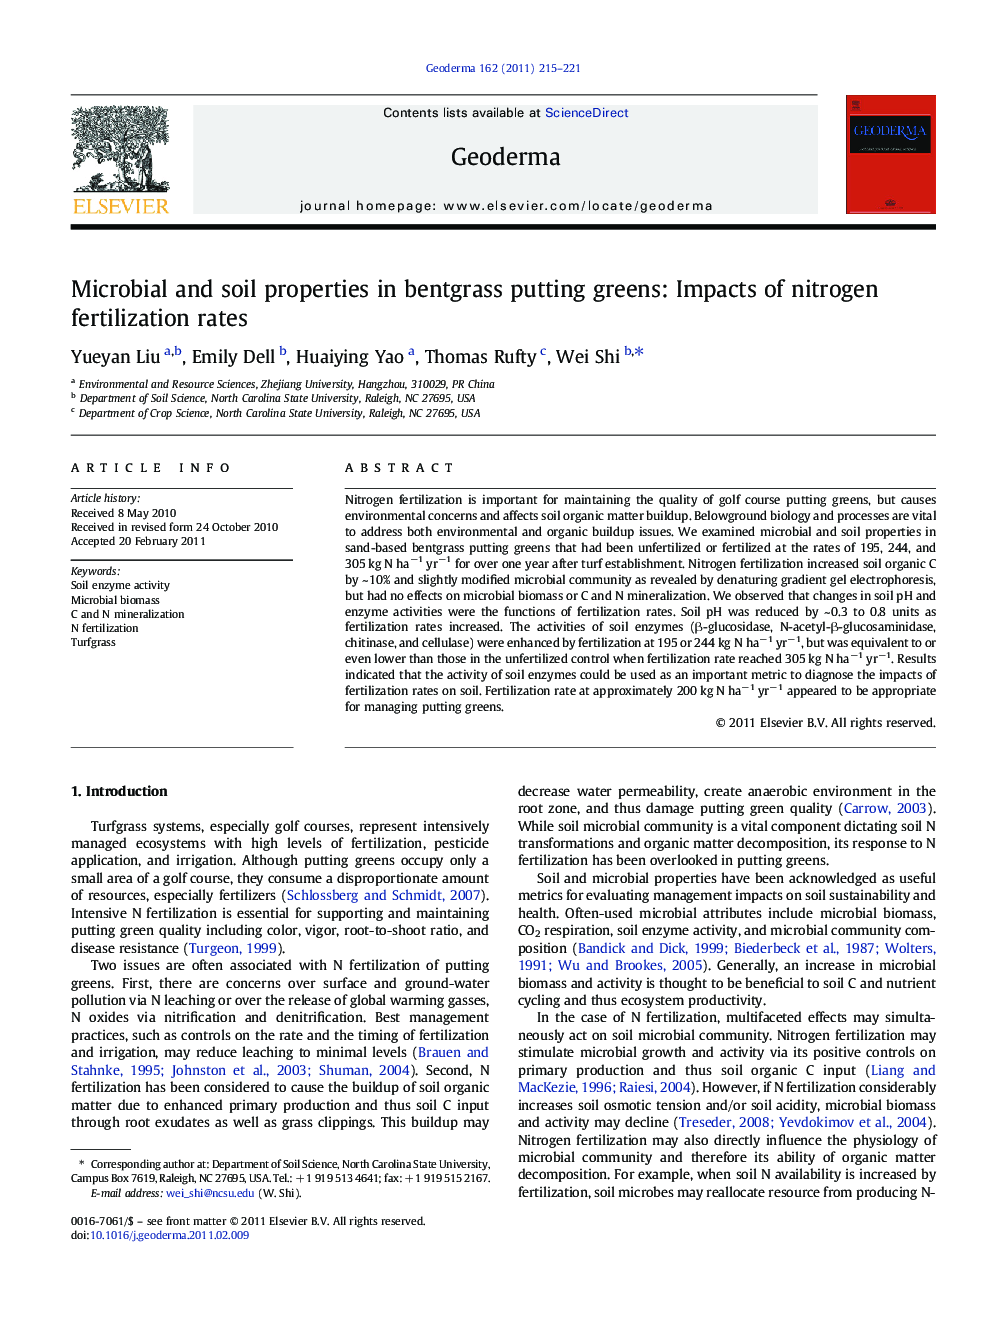 Microbial and soil properties in bentgrass putting greens: Impacts of nitrogen fertilization rates